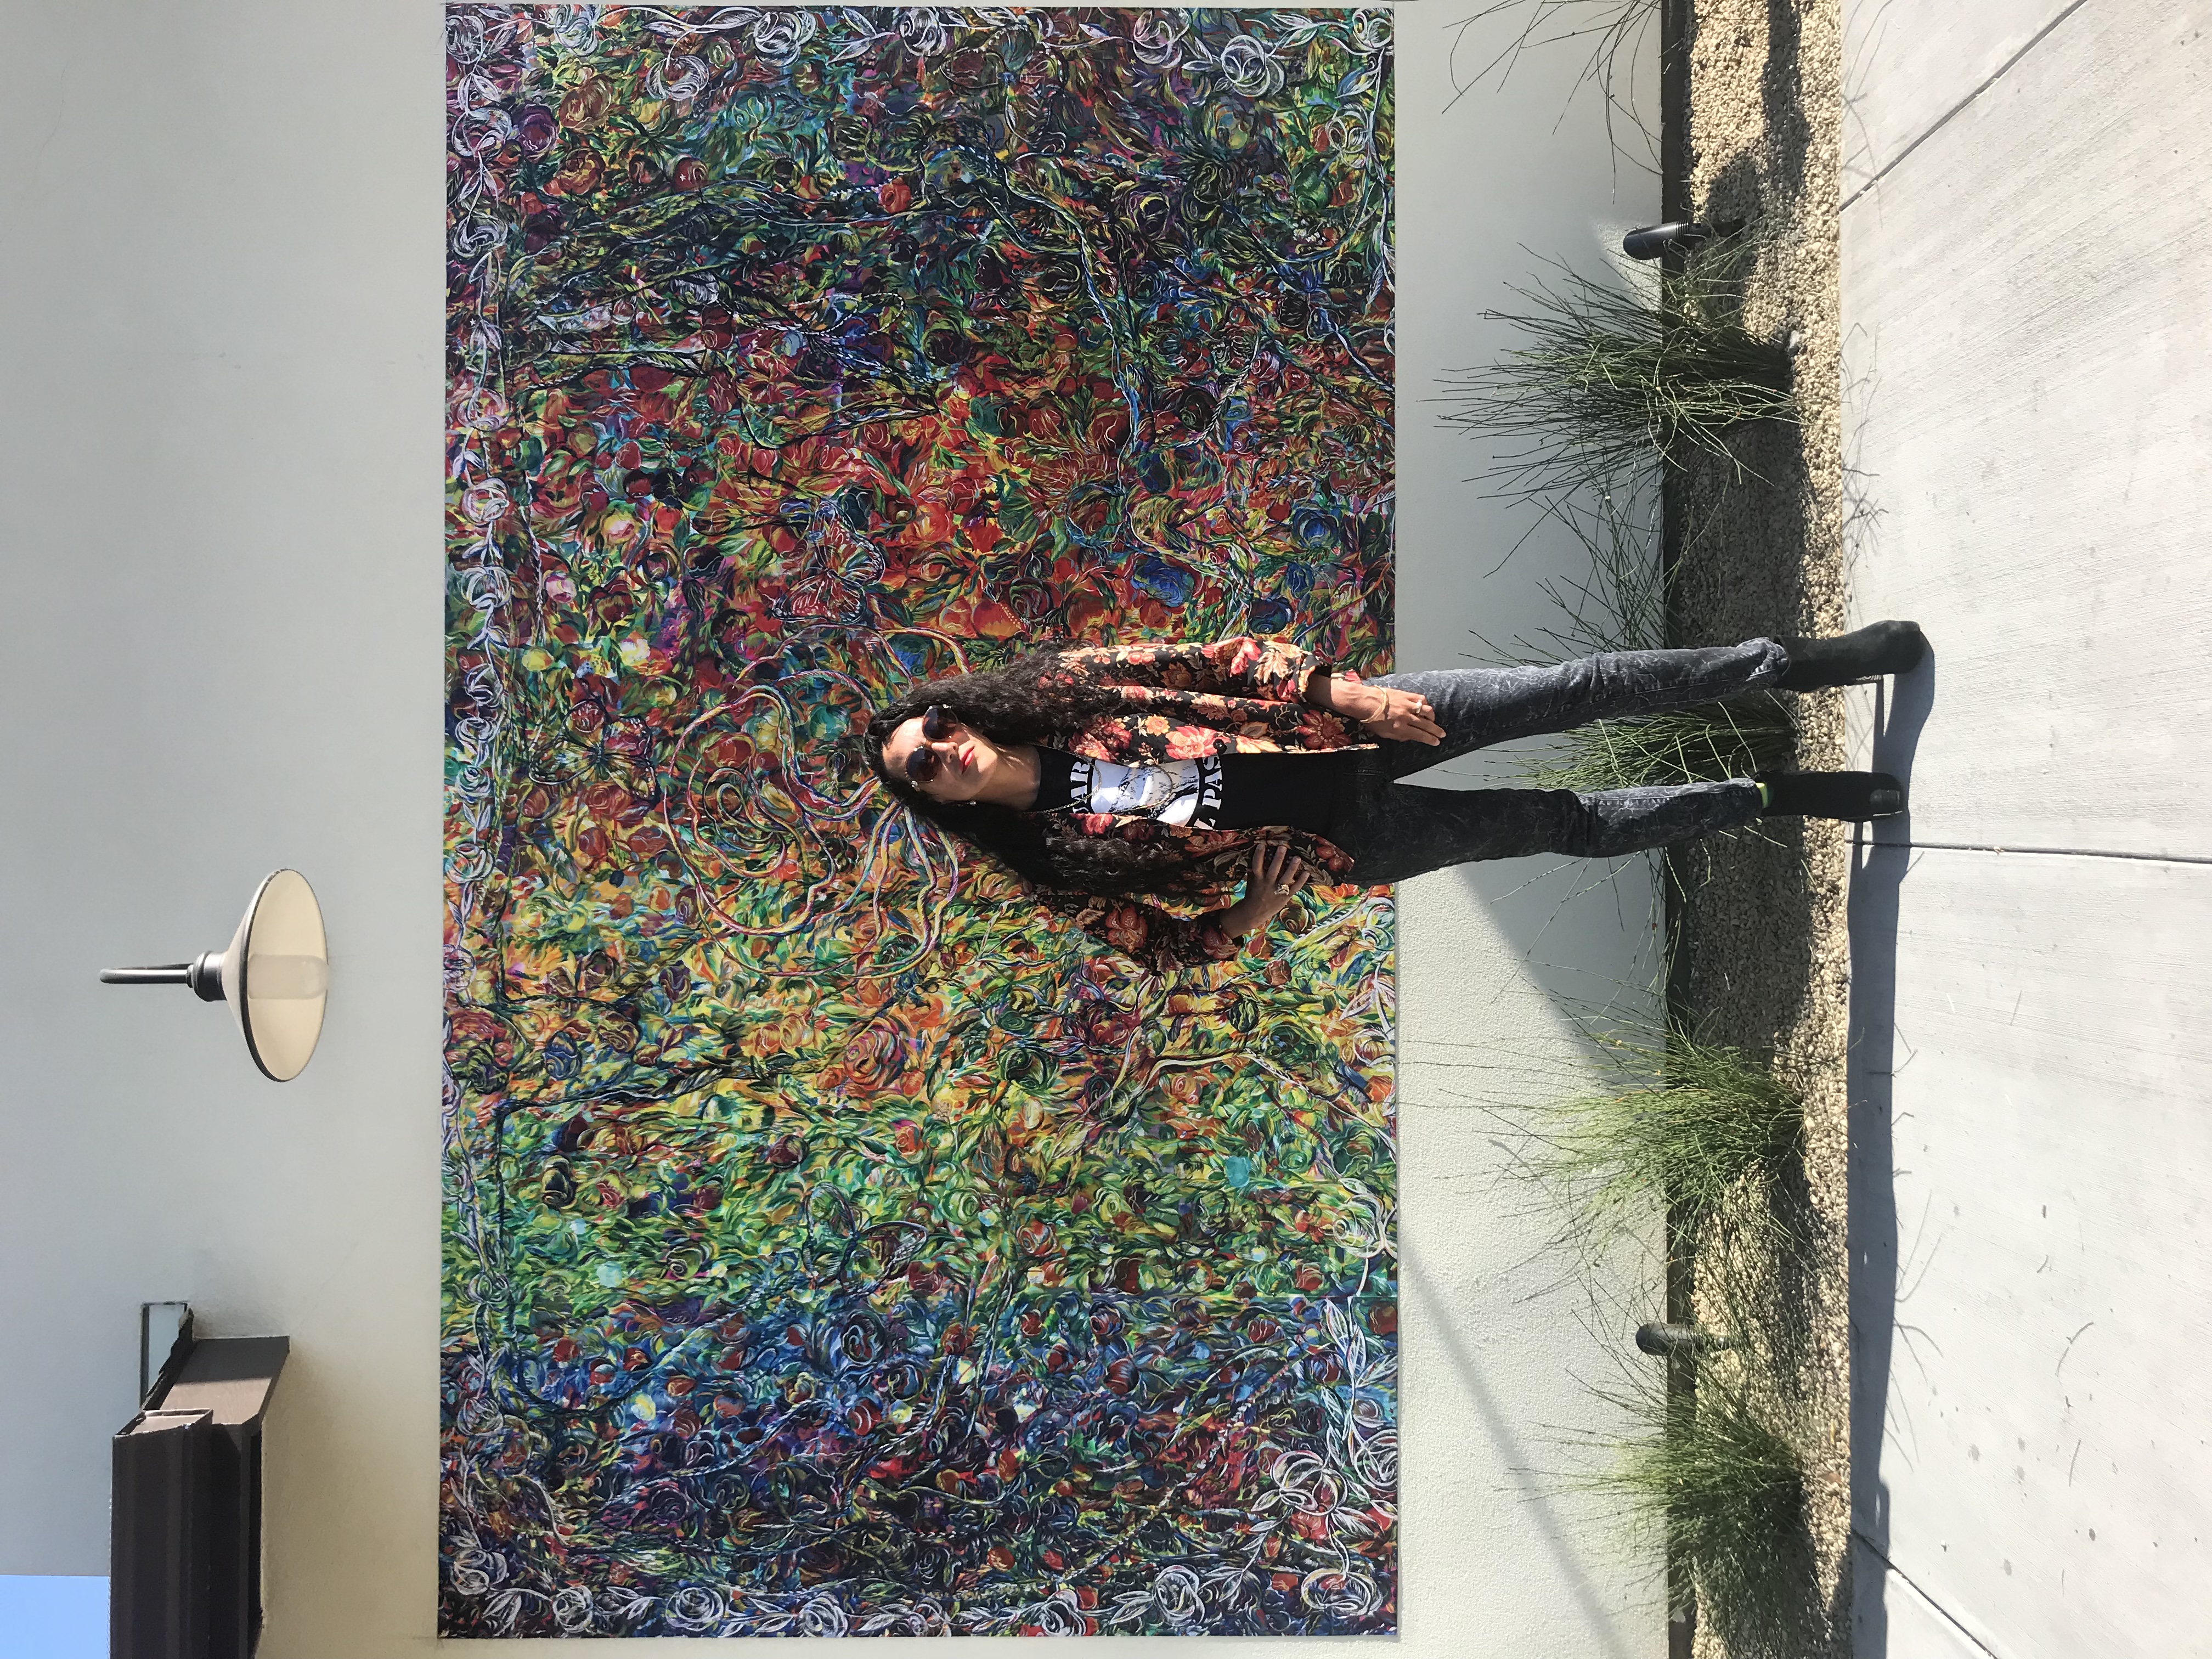 picture of Maria de los Angeles from far away, long curly hair, sunglasses on, looking at the camera smiling. Standing infront of a mural full of colors and free formed lines